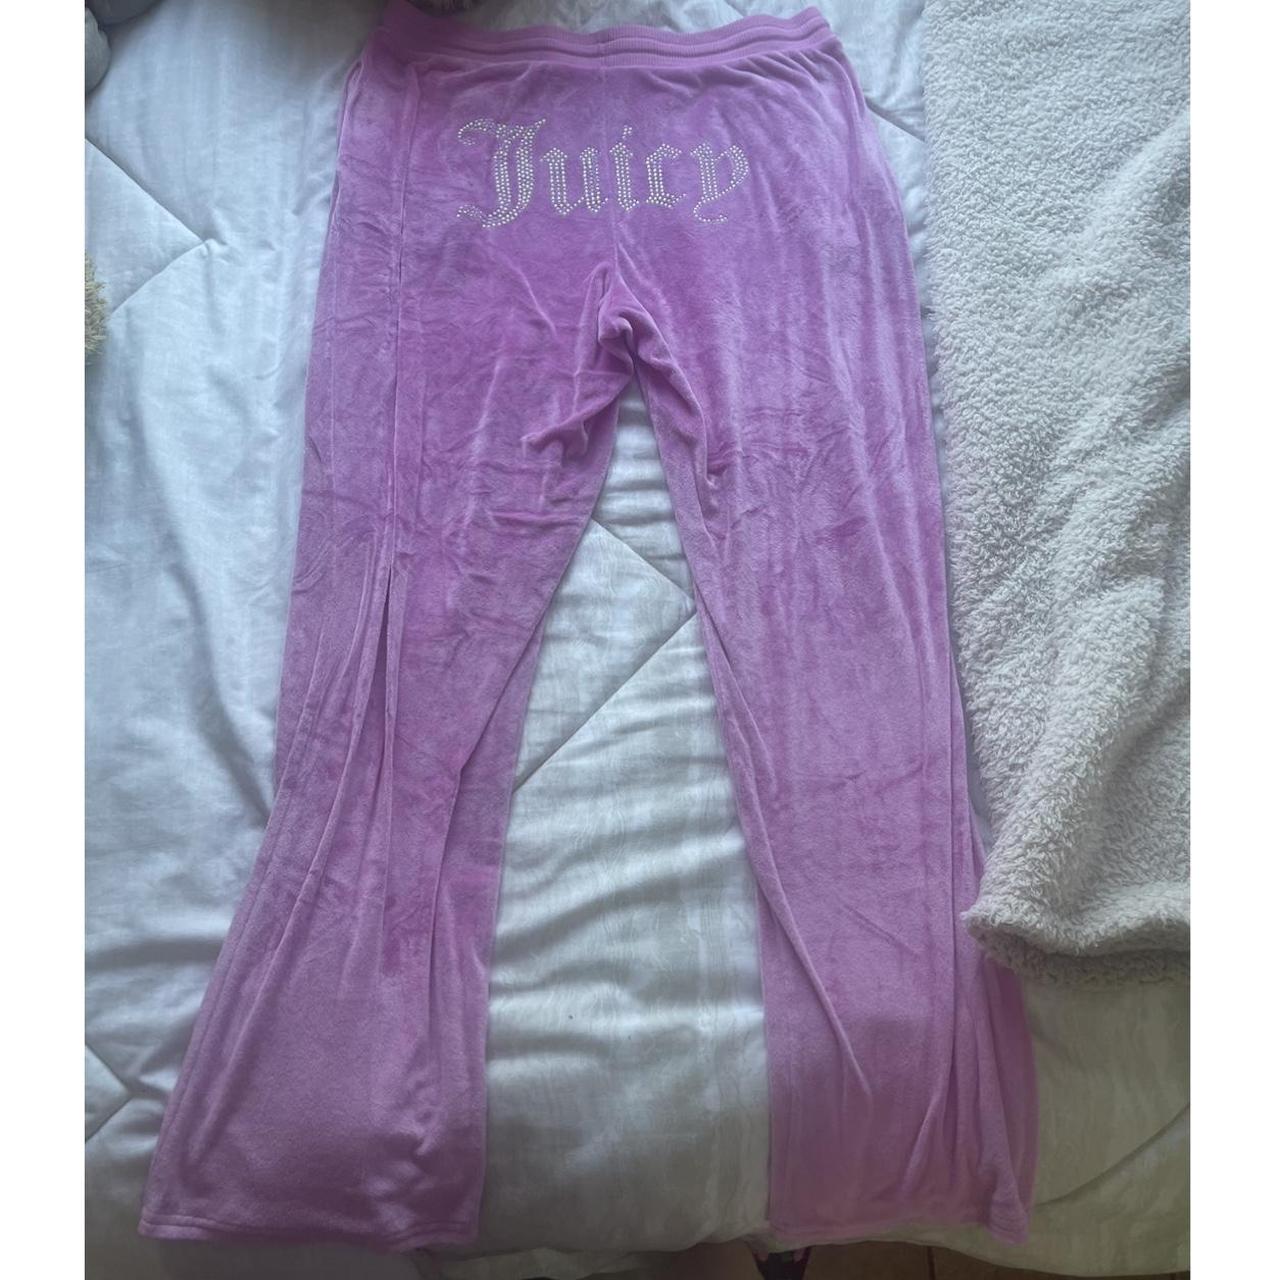 🌸 PINK JUICY COUTURE JOGGERS 🌸 💗 super cute and - Depop